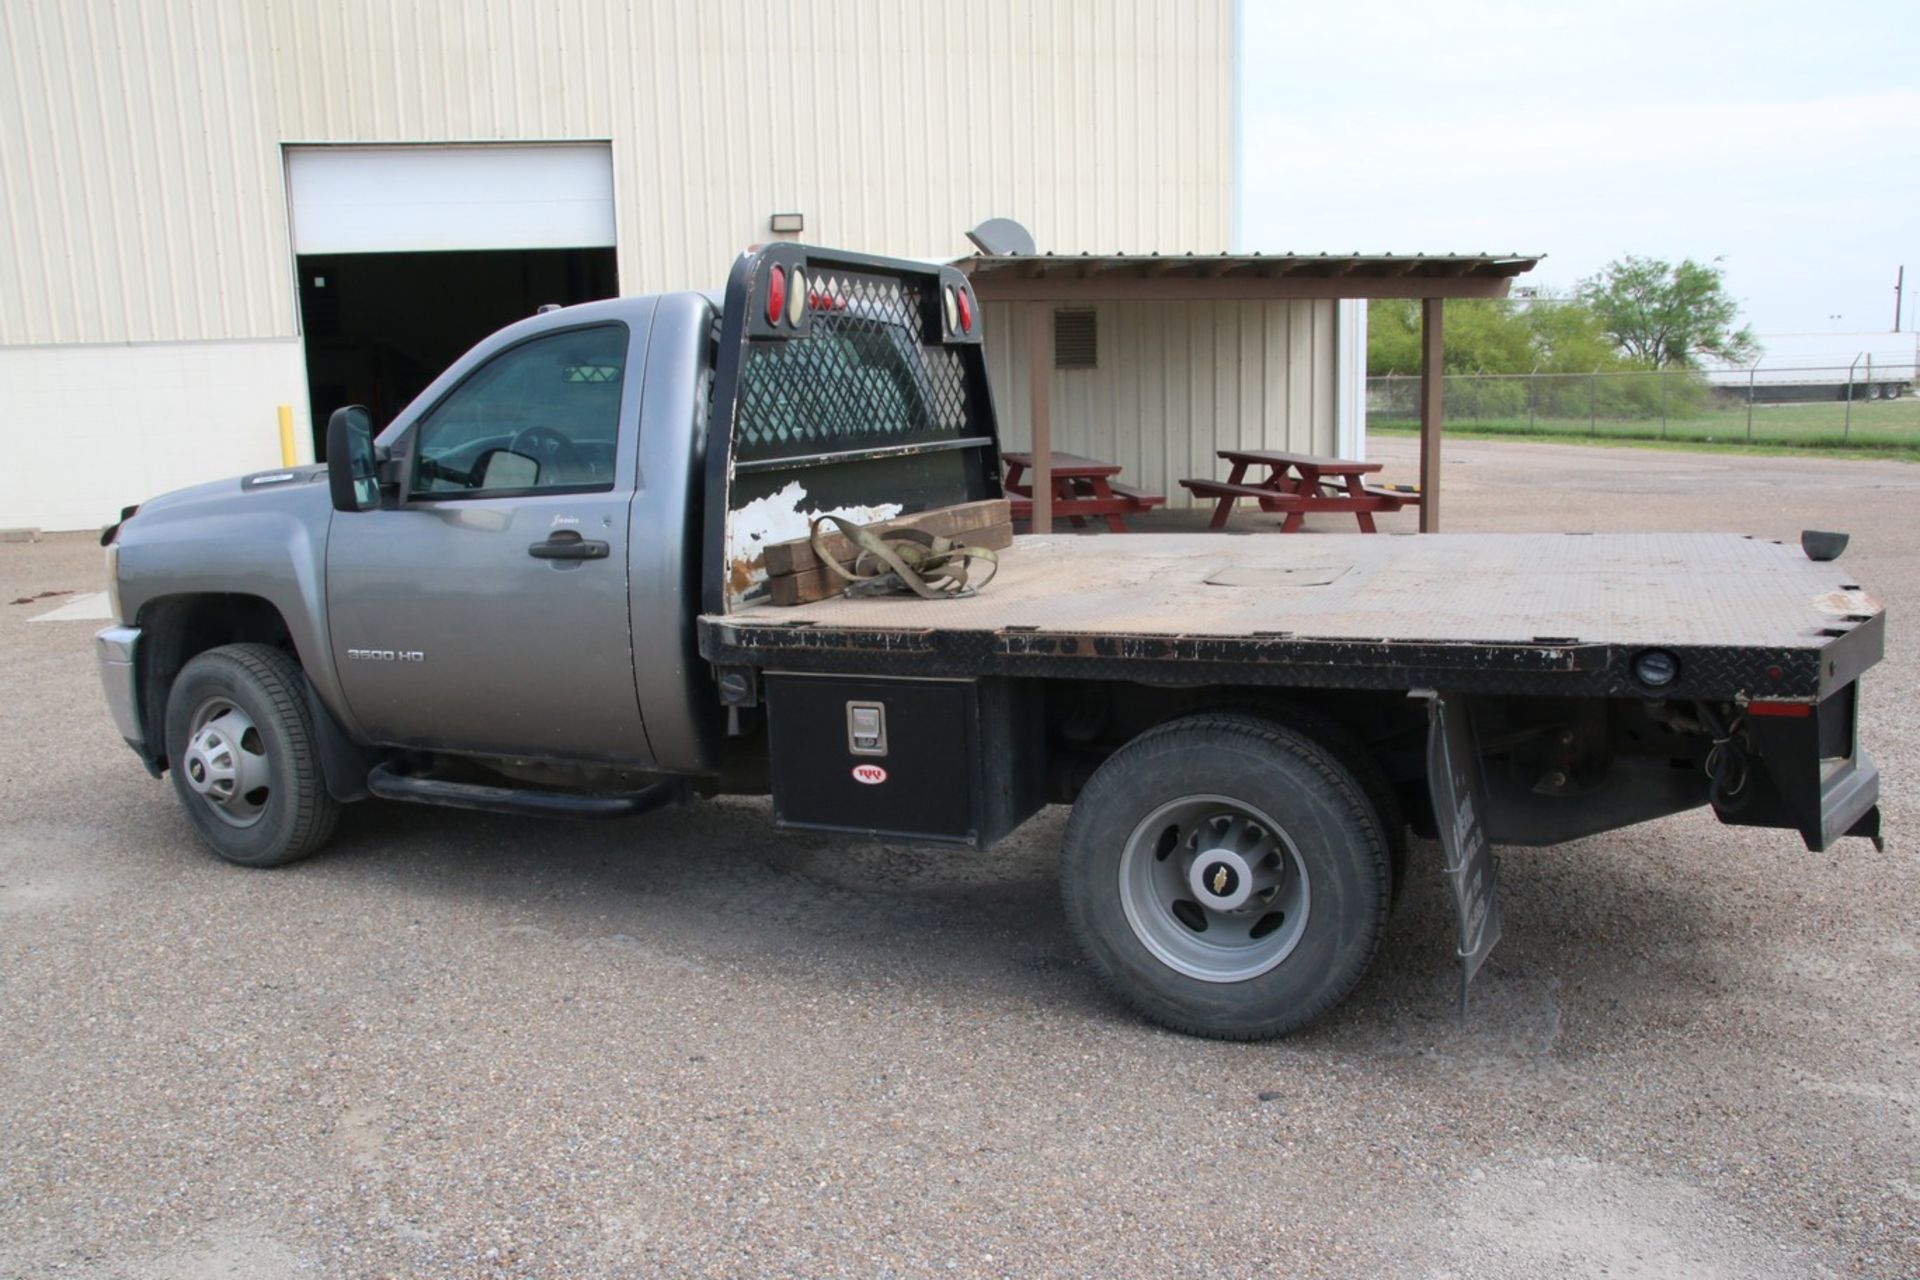 2013 Chevy 3500HD Chevy Silverado 3500HD Work Truck Good Tires, Good Interior, Automatic, 173,396 - Image 2 of 14